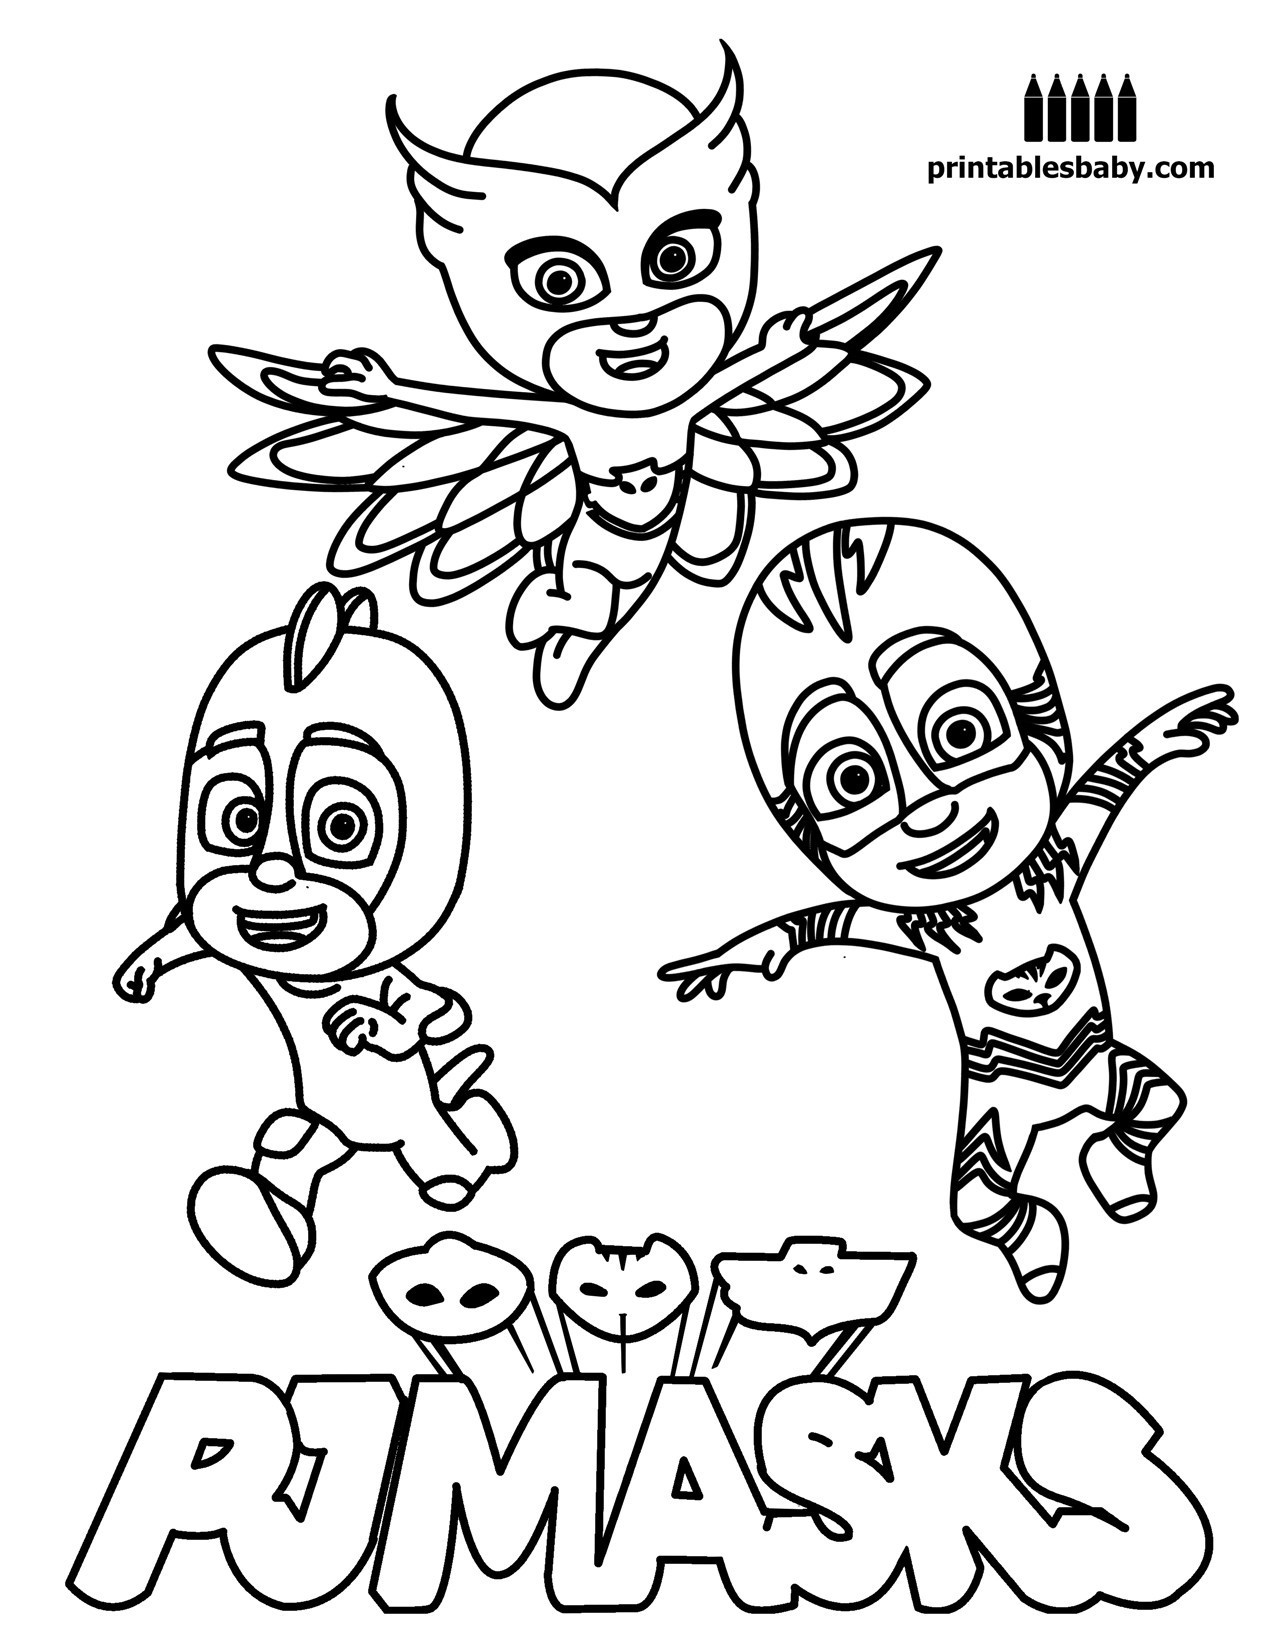 Pj Mask Owlette Coloring Pages at GetColorings.com | Free ...